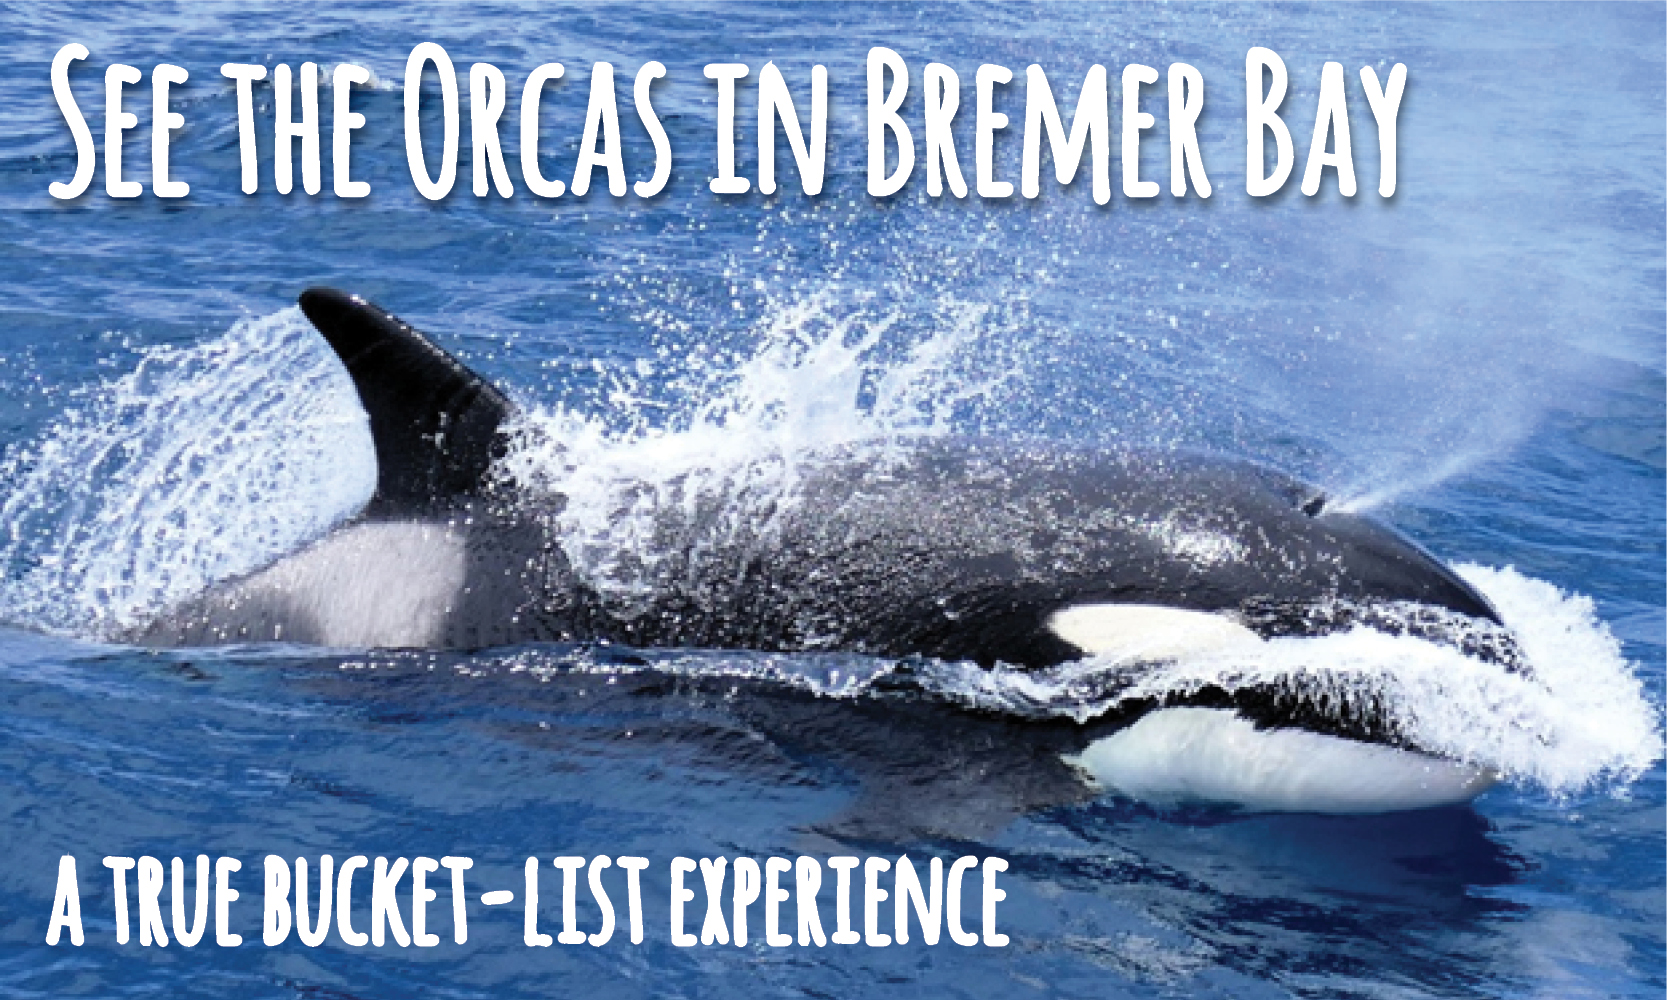 Bremer Bay Canyon Tour to experience the amazing Orcas